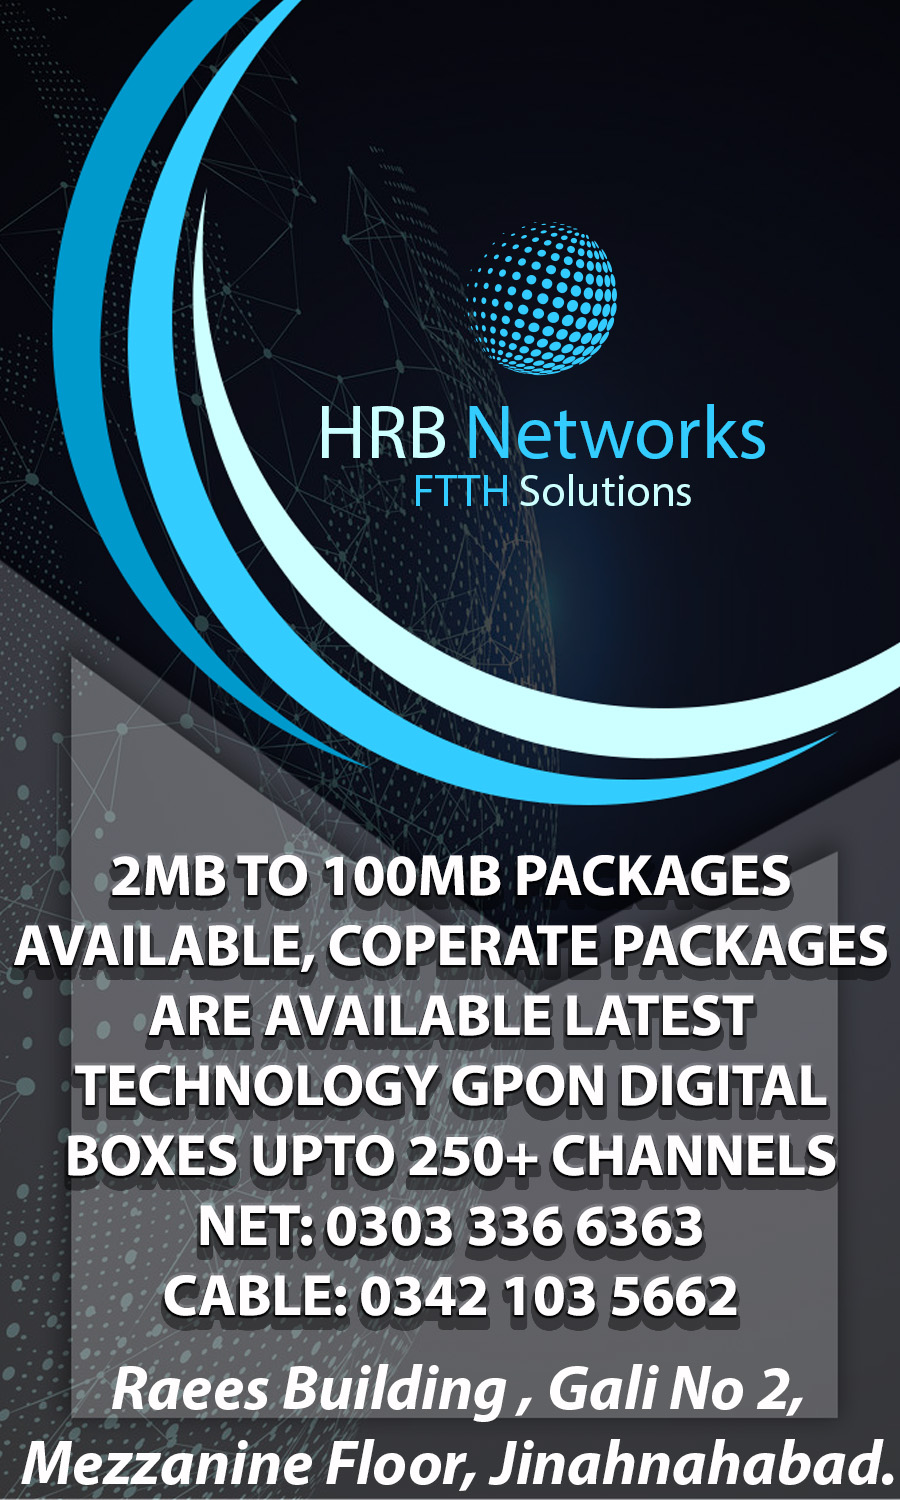 HRB Networks